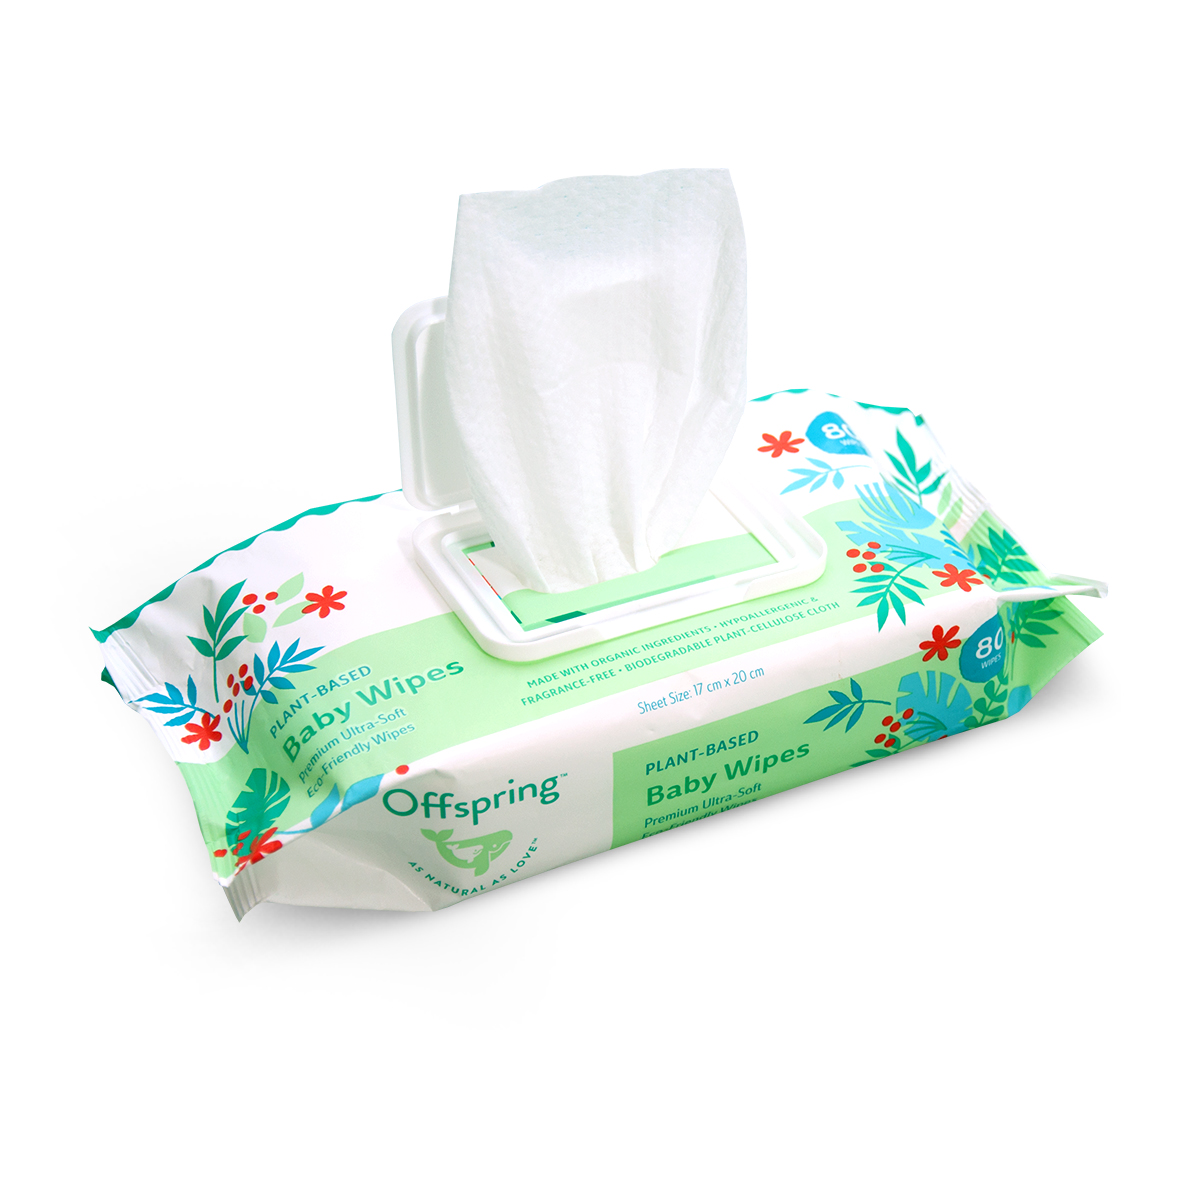 Offspring Plant-Based Baby Wipes 80ct